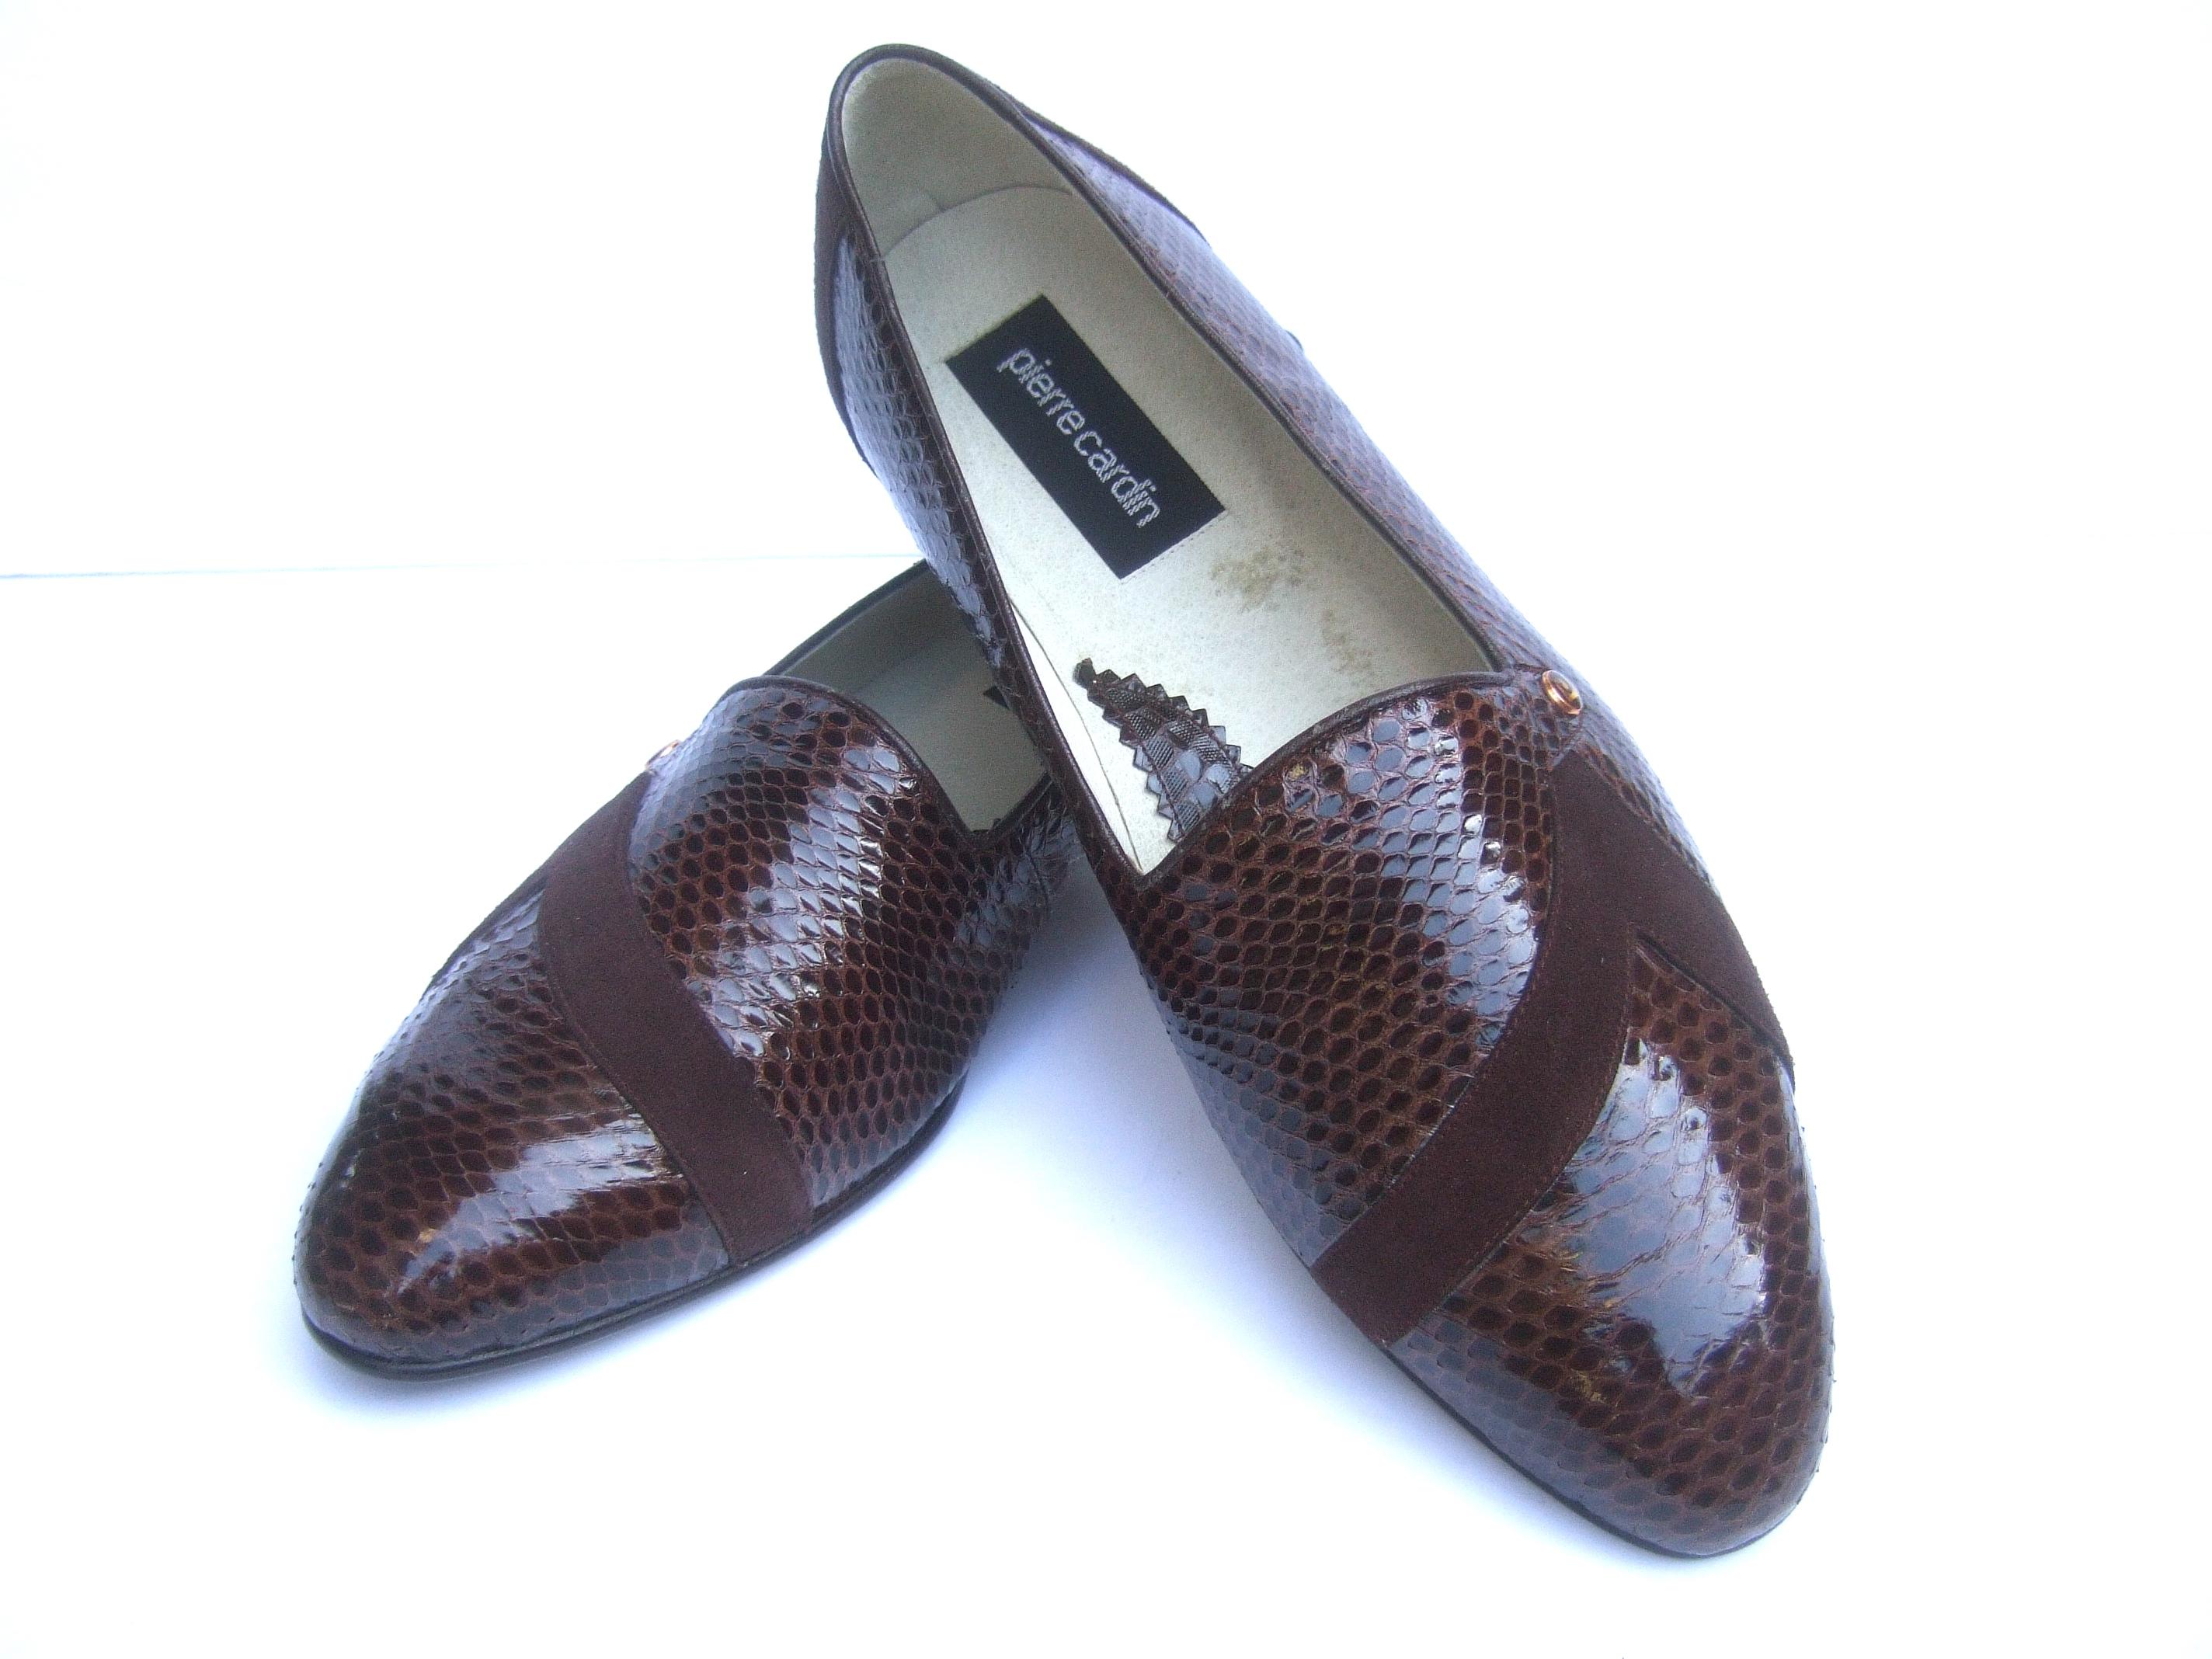 Pierre Cardin men's exotic brown snakeskin dress shoes New Vintage US Size 11 (Vintage Size) 
The stylish men's slip-on shoes are constructed with glossy brown snakeskin juxtaposed with bands of brown suede on the front & a panel on the back